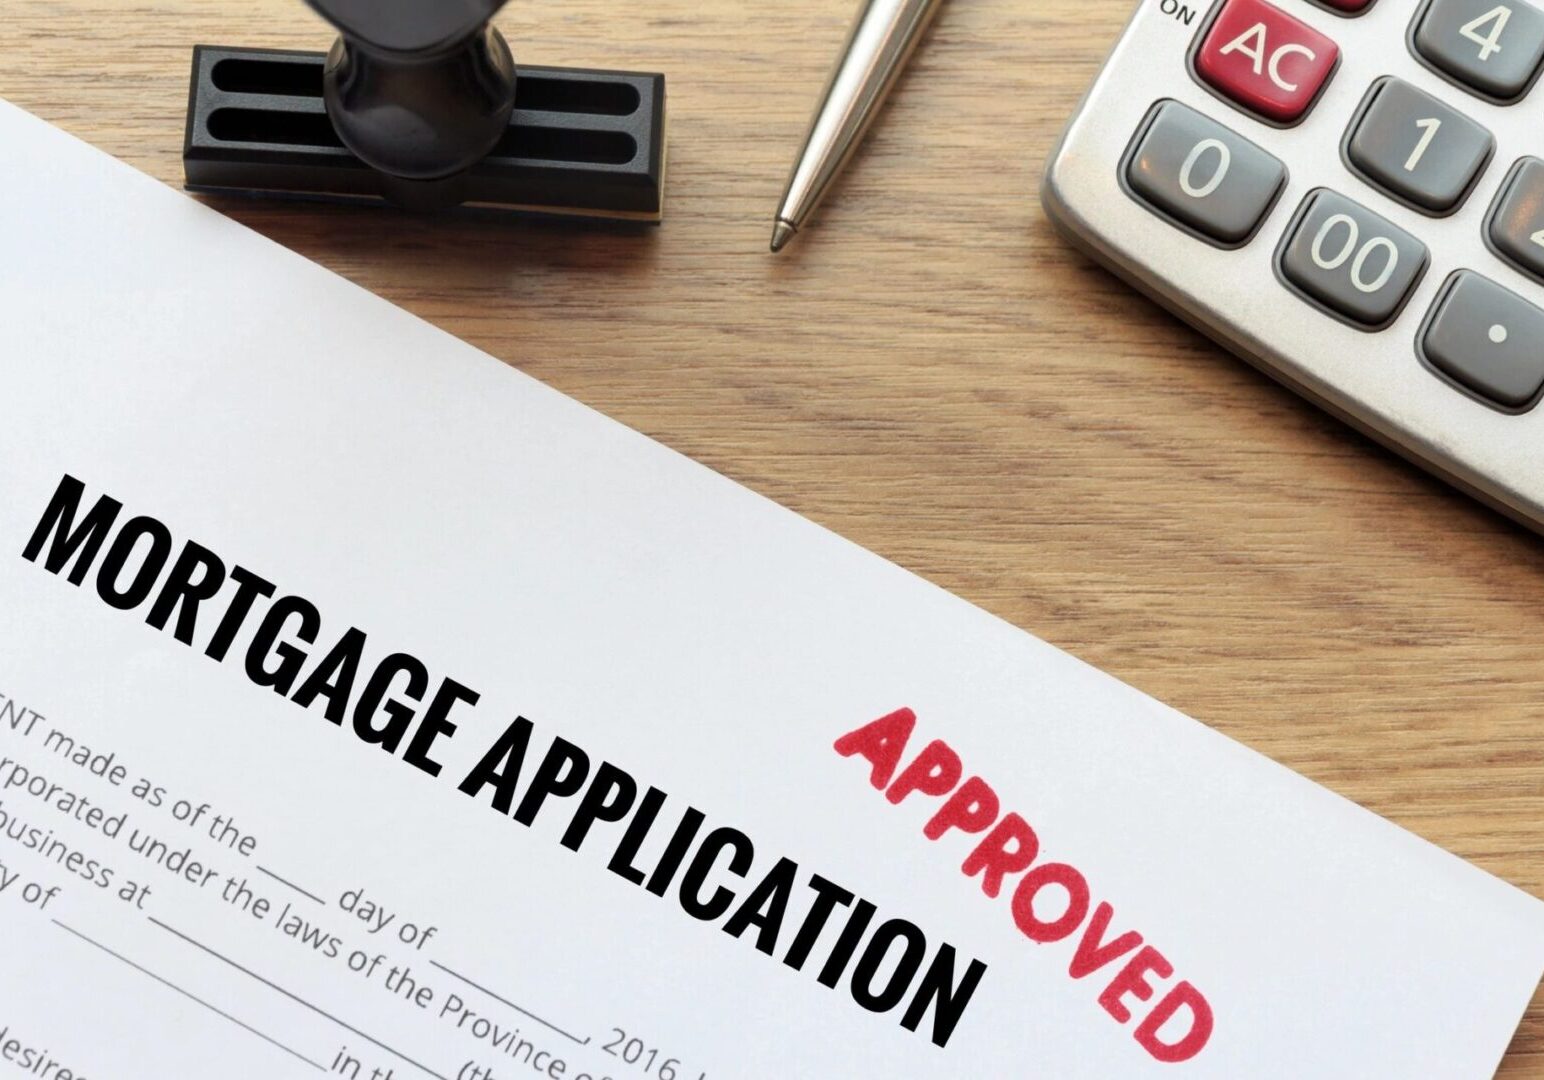 A mortgage application sitting on top of a table.